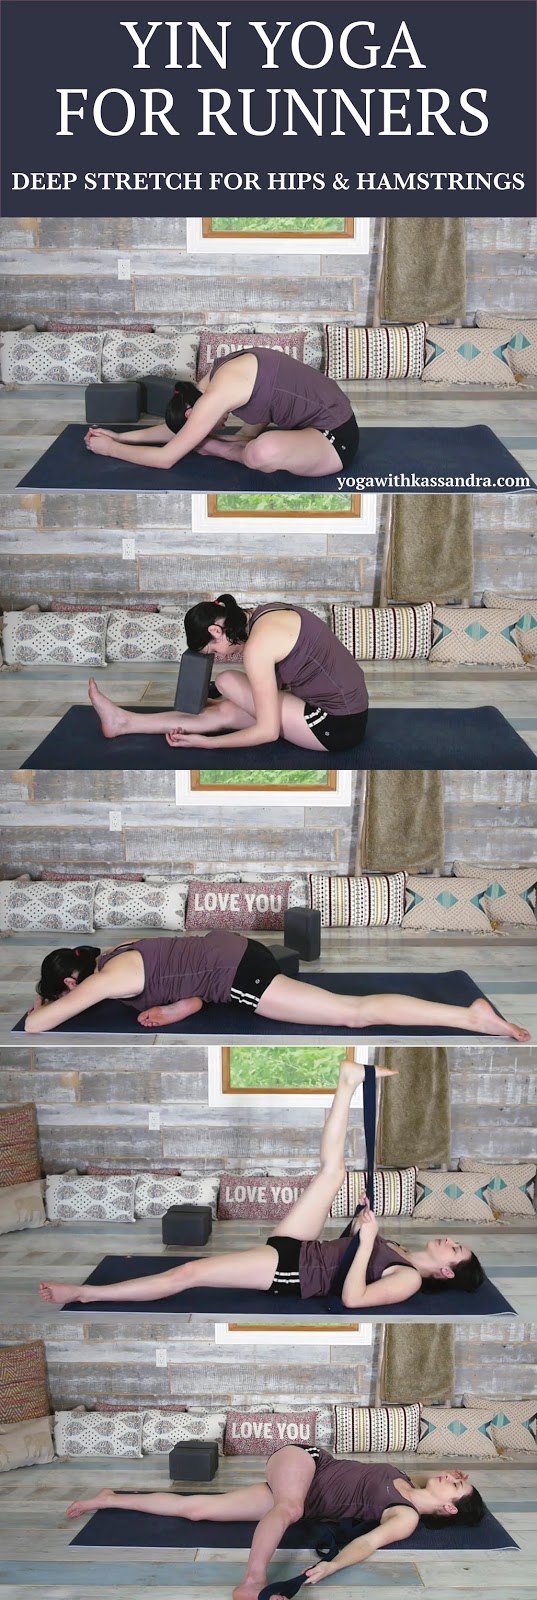 Yoga for runners is one of the videos I get the most requests for. And although yoga for runners was one of the first videos that I created on my channel, I thought it was time for a revamp (bigger and better right?)   As these are yin yoga poses, we move slowly through only a handful of poses and hold each one for about 3-5 minutes. Take your time setting up for each of these poses, get in and out of them slowly. Additionally due to the lengthy holds, you will want to keep the intensity level for each one at around a 5 out of 10 (if 1 is easeful, and 10 is painful).   Stay mindful through these poses and present in the moment, instead of letting your mind wander to what is distracting you off of your mat.   If you would prefer to have someone walk you through these poses, with some light musical accompaniment, check out the full 50 minute video for this practice: Yin Yoga for Runners.